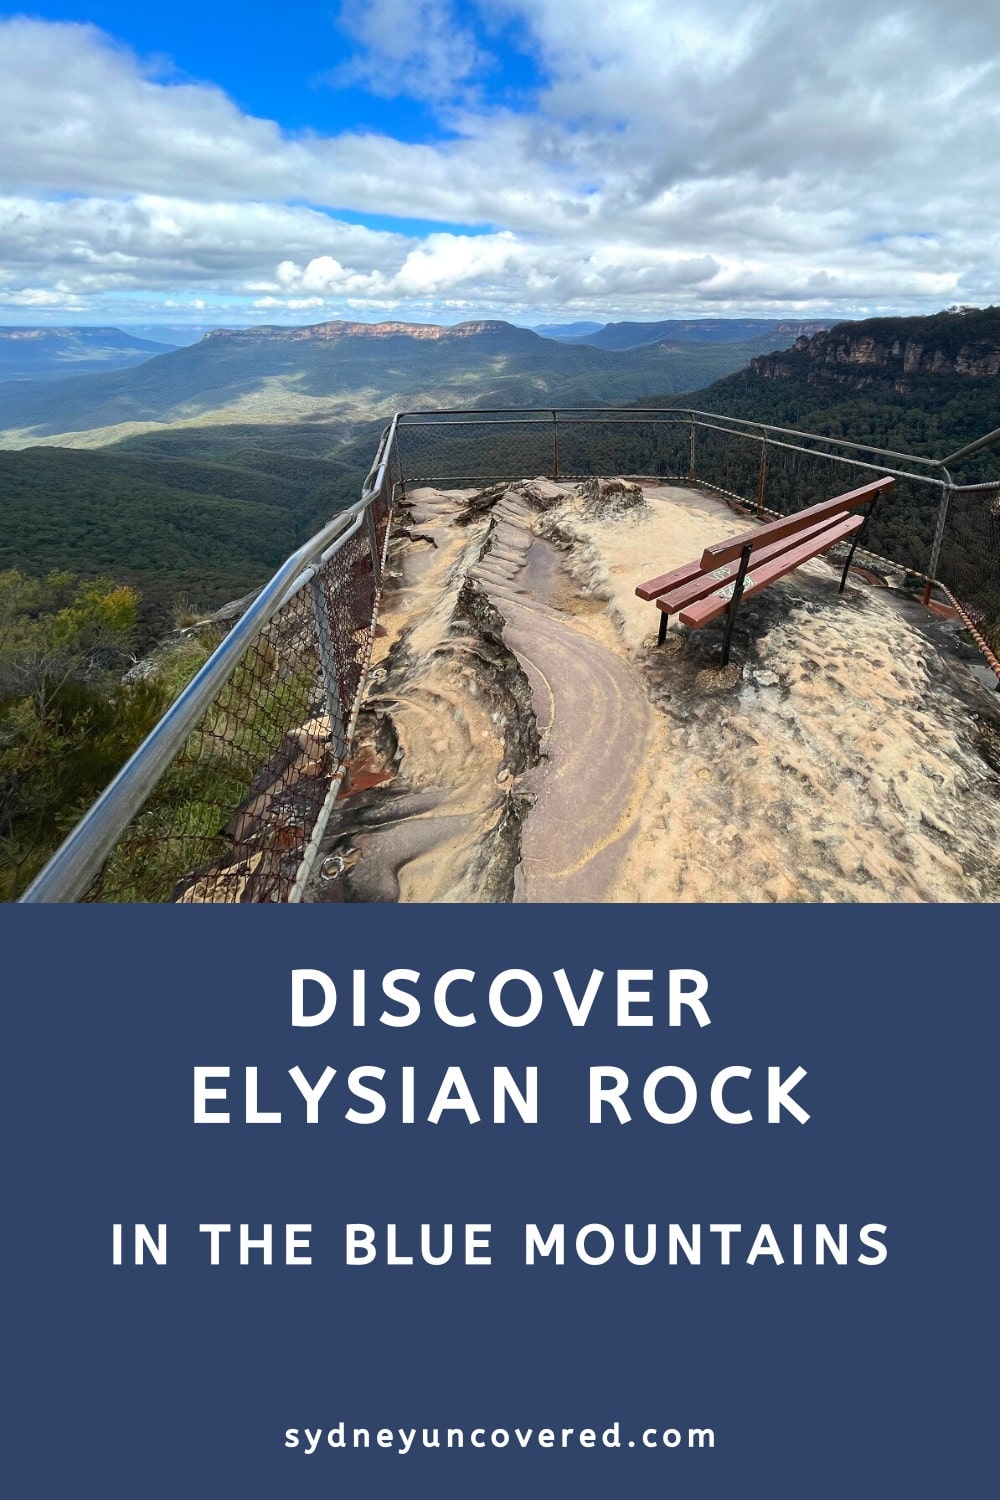 Discover Elysian Rock in the Blue Mountains